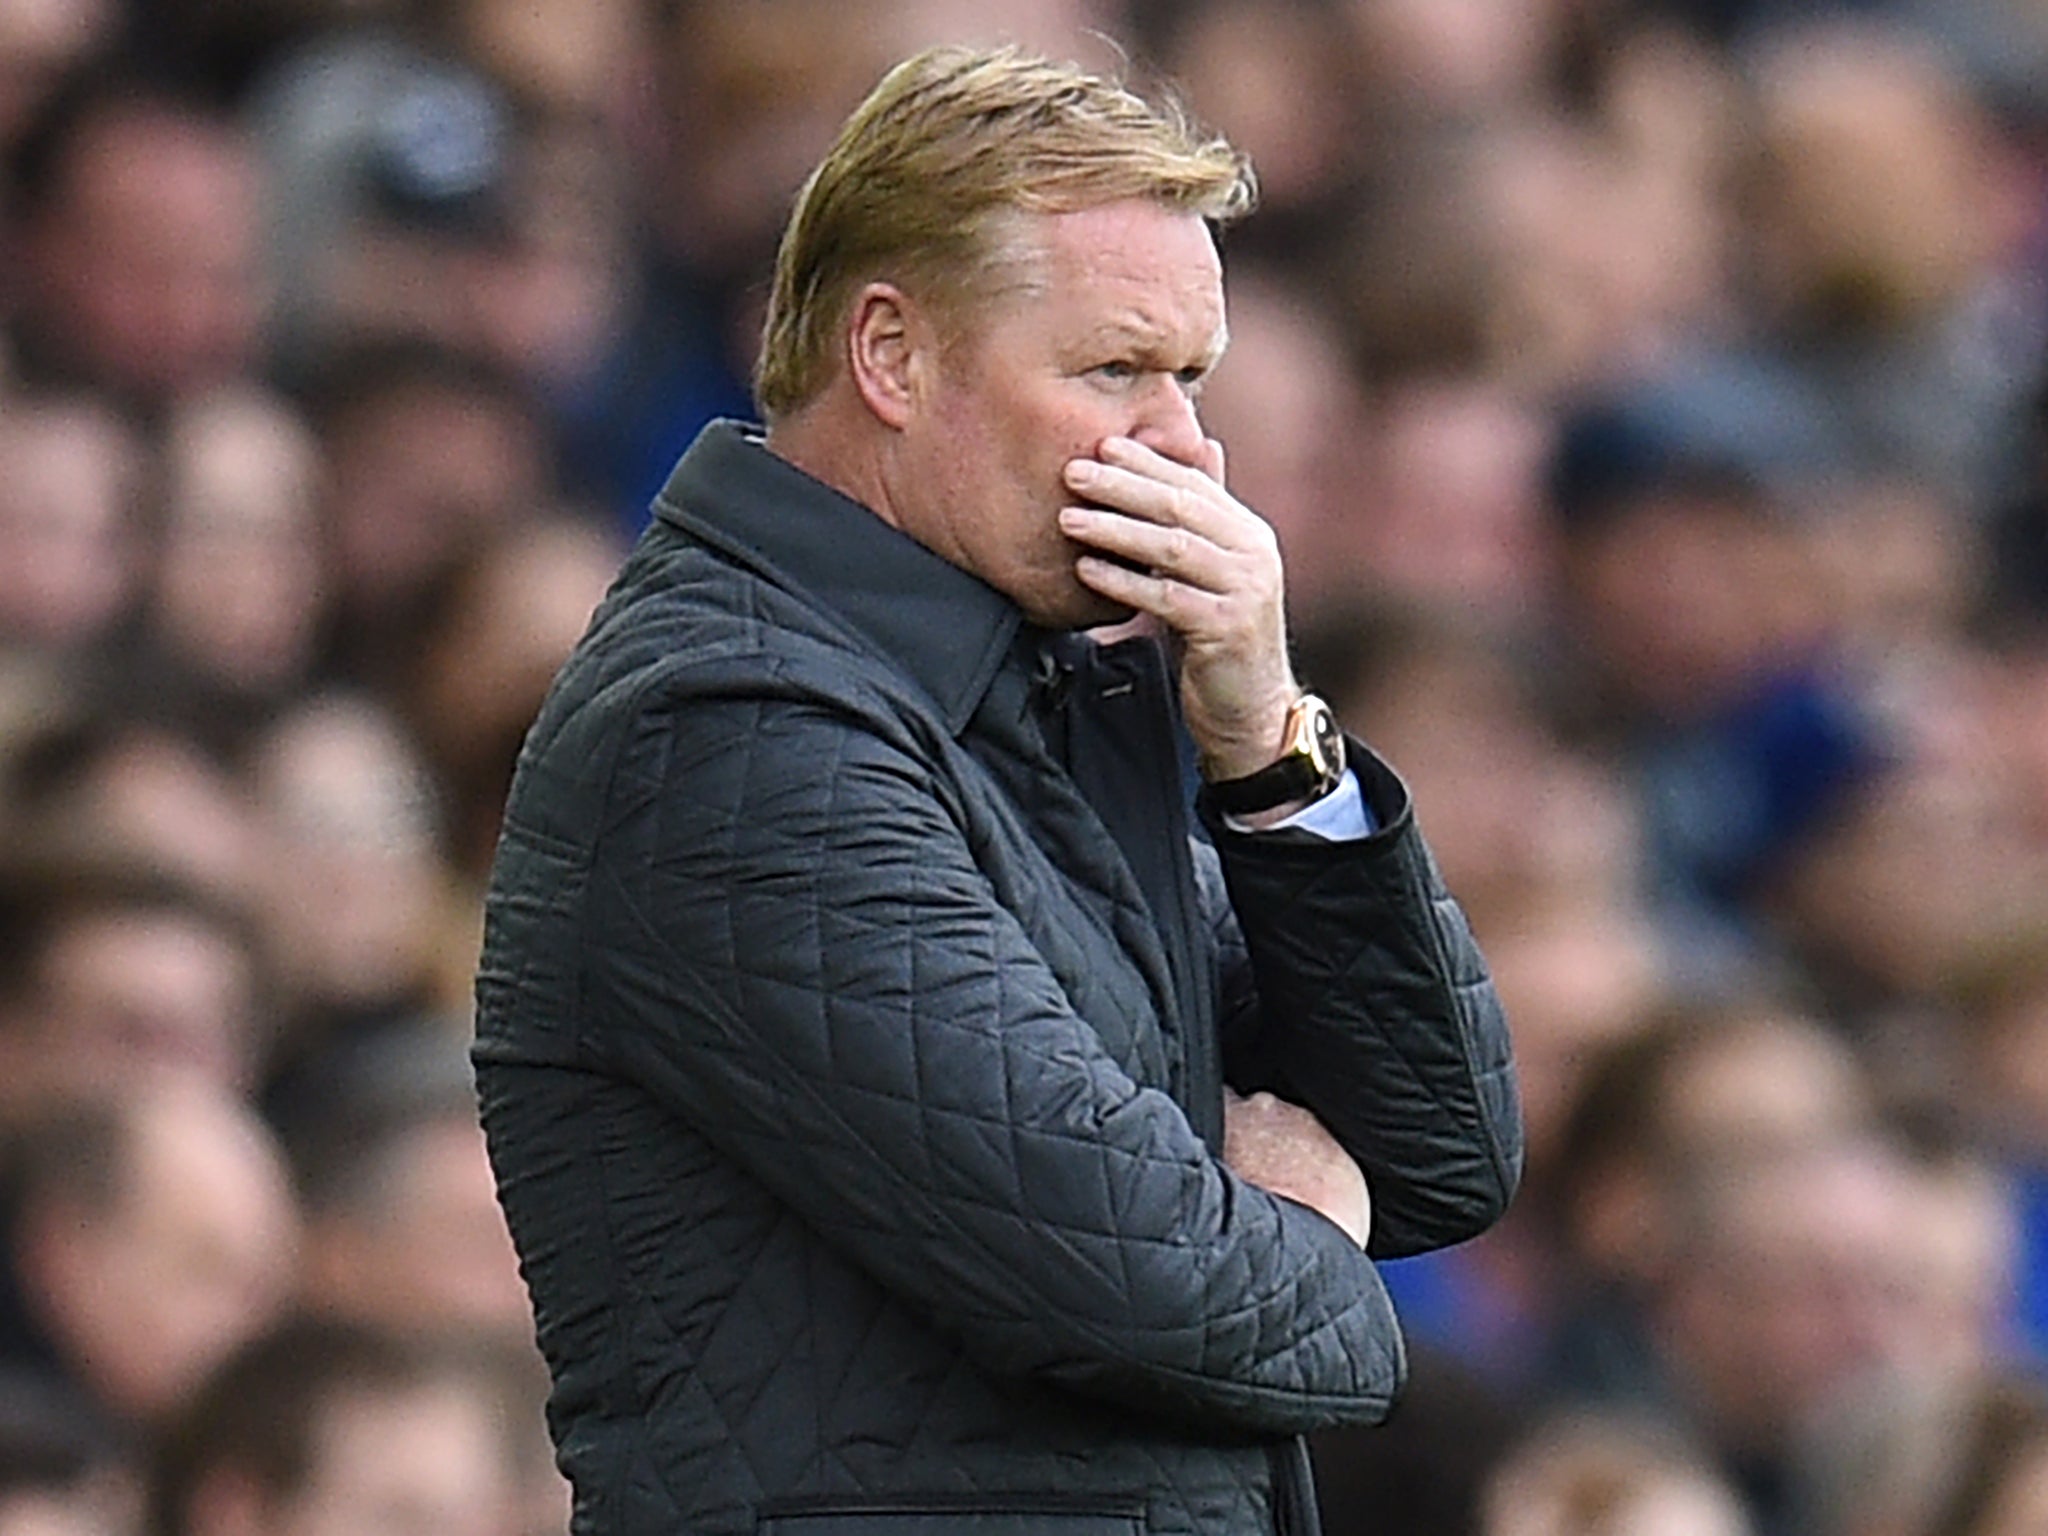 Ronald Koeman is on the brink of being sacked at Everton after a 5-2 defeat by Arsenal